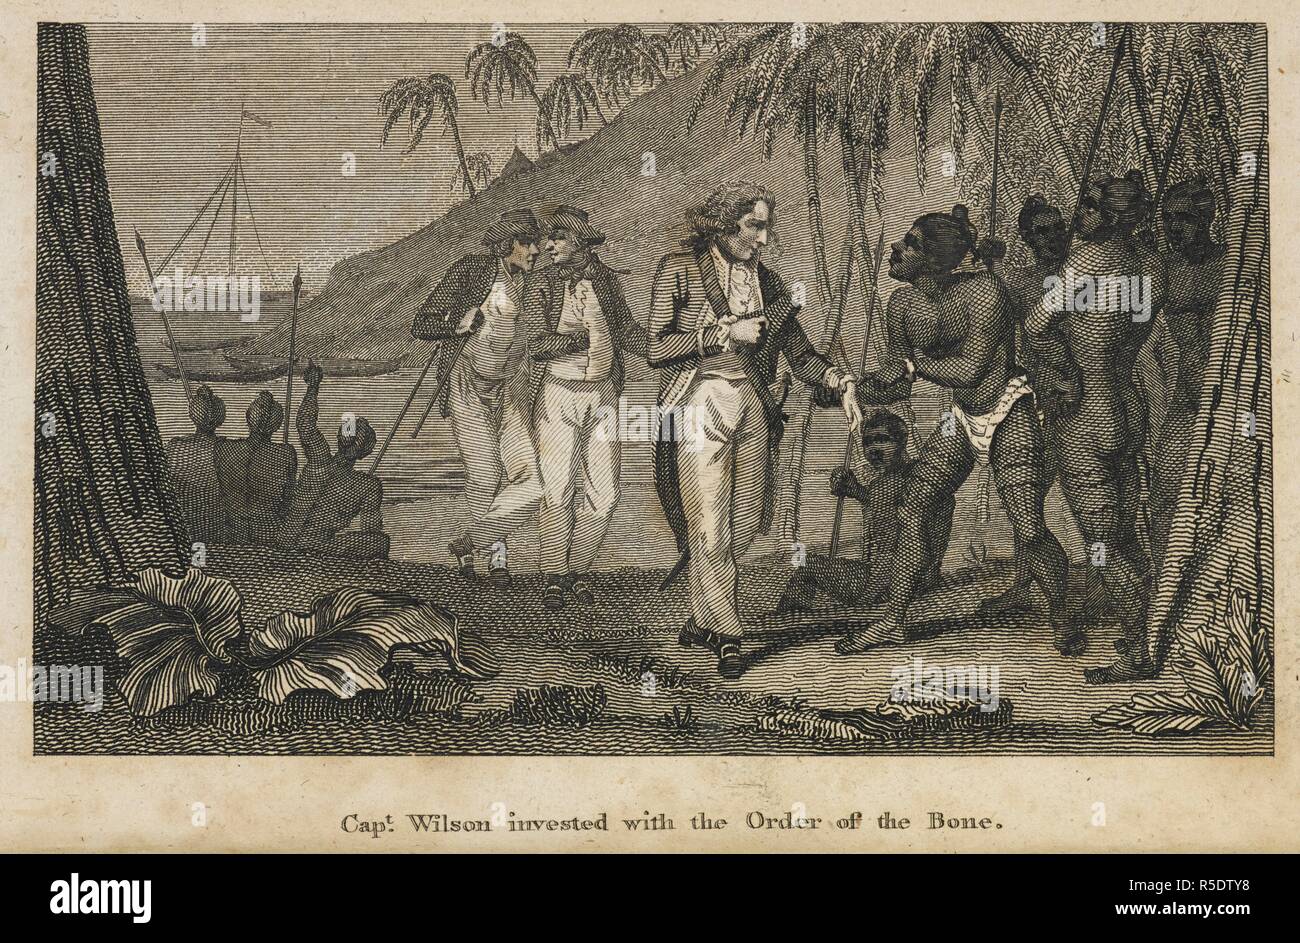 Capt' Wilson invested with the order of the bone.' Henry Wilson (1740â€“1810) was an English naval captain of the British East India Company. He commanded the packet ship Antelope, when it shipwrecked off Ulong Island, near Koror Island in Palau (Pelew)in 1783. Narrative of the Shipwreck of the Antelope, East-India Pacquet, on the Pelew Islands ... in August, 1783. Source: 16126.d.3.(). Language: Japanese. Stock Photo